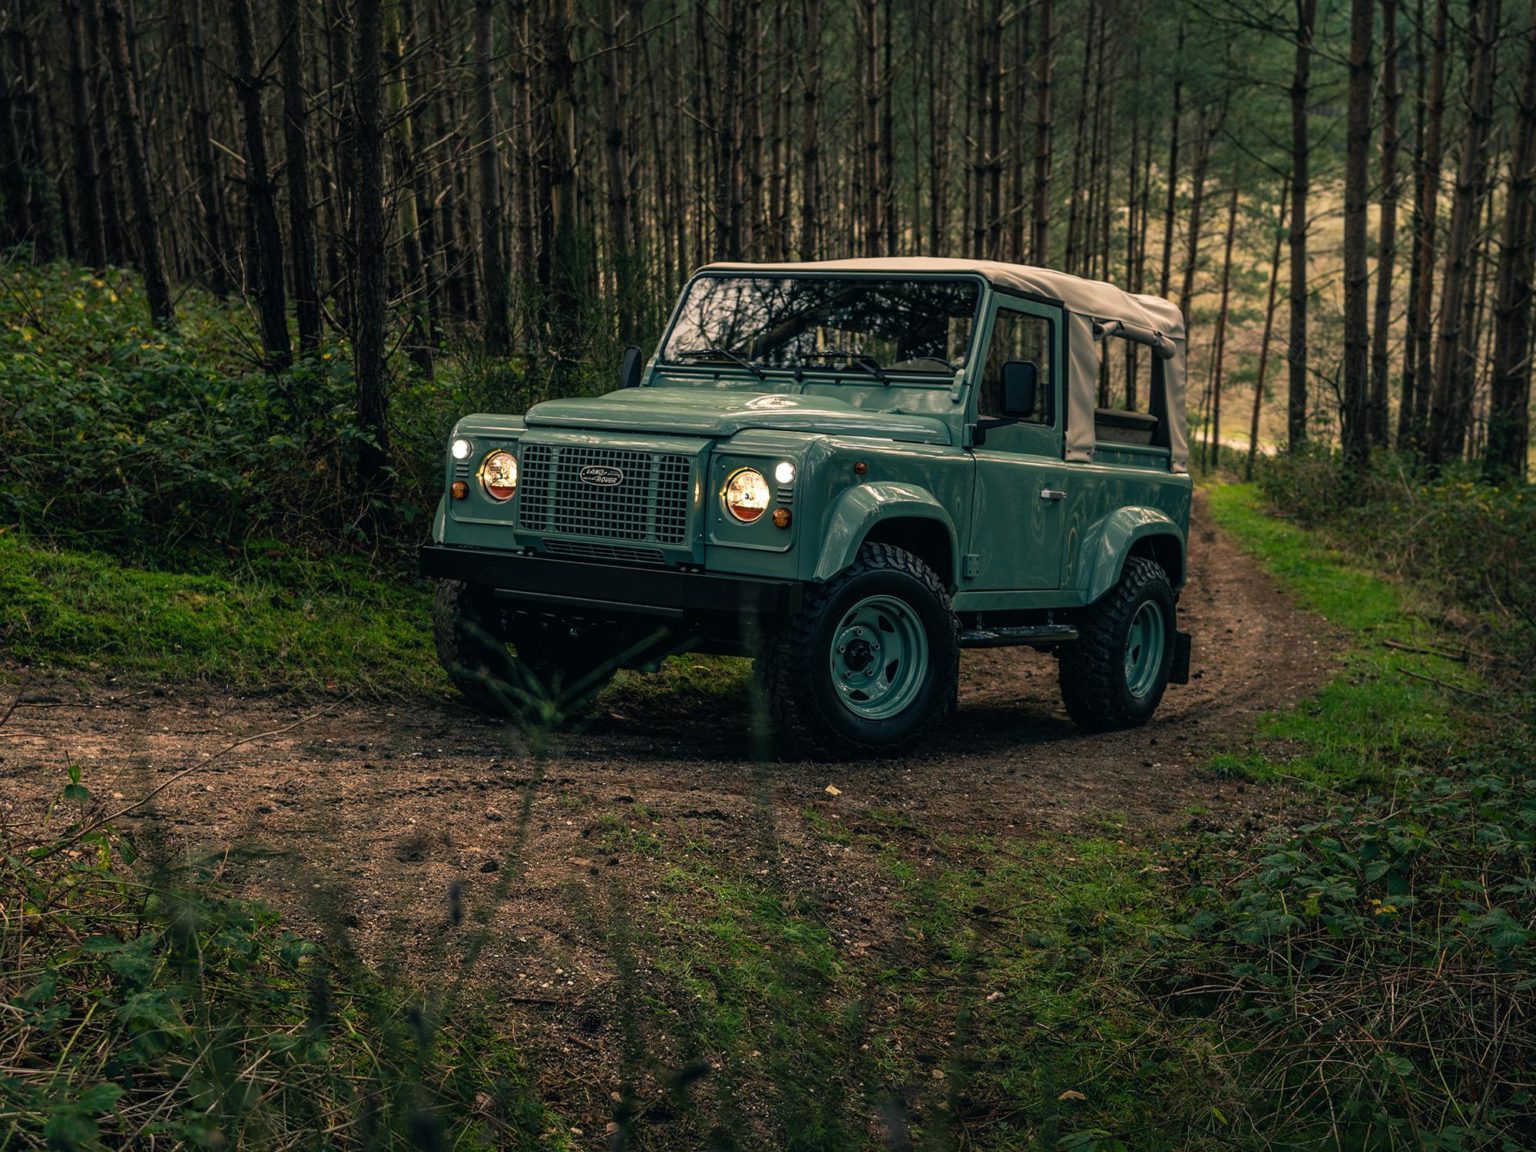 Heritage Customs offers a bespoke take on the vintage Land Rover Defender.